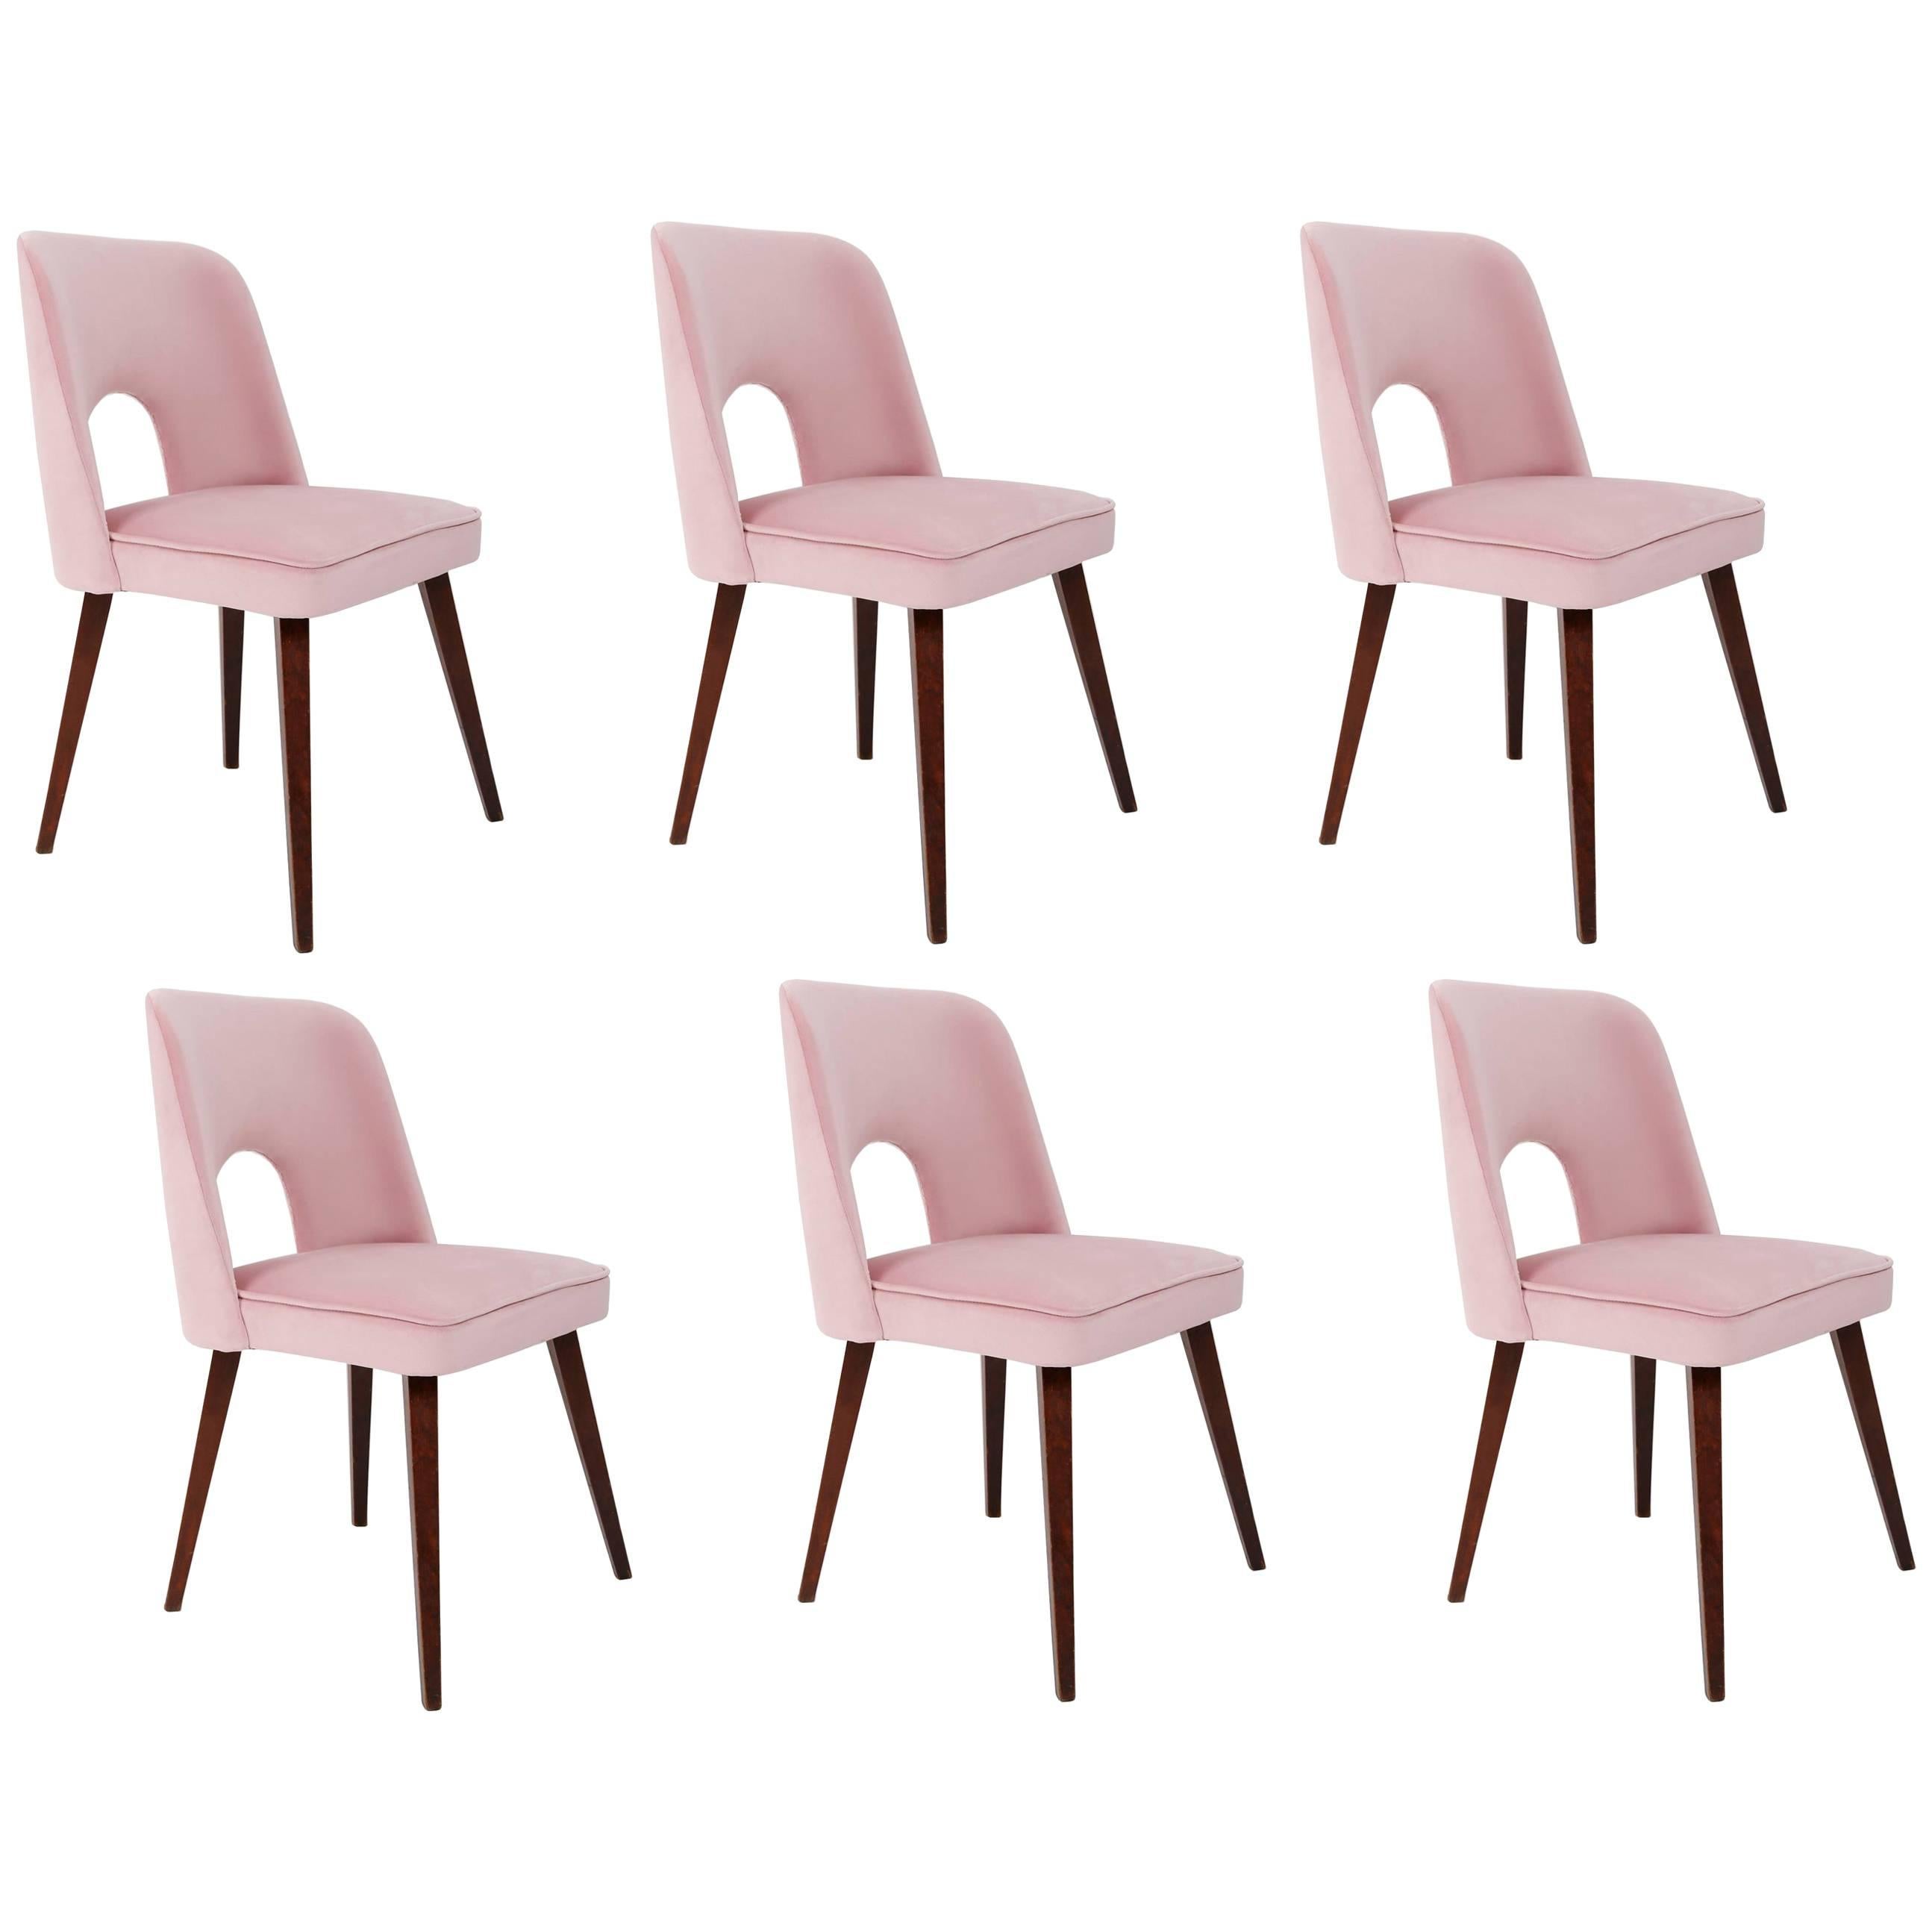 Set of Six Baby Pink "Shell" Chairs, 1960s